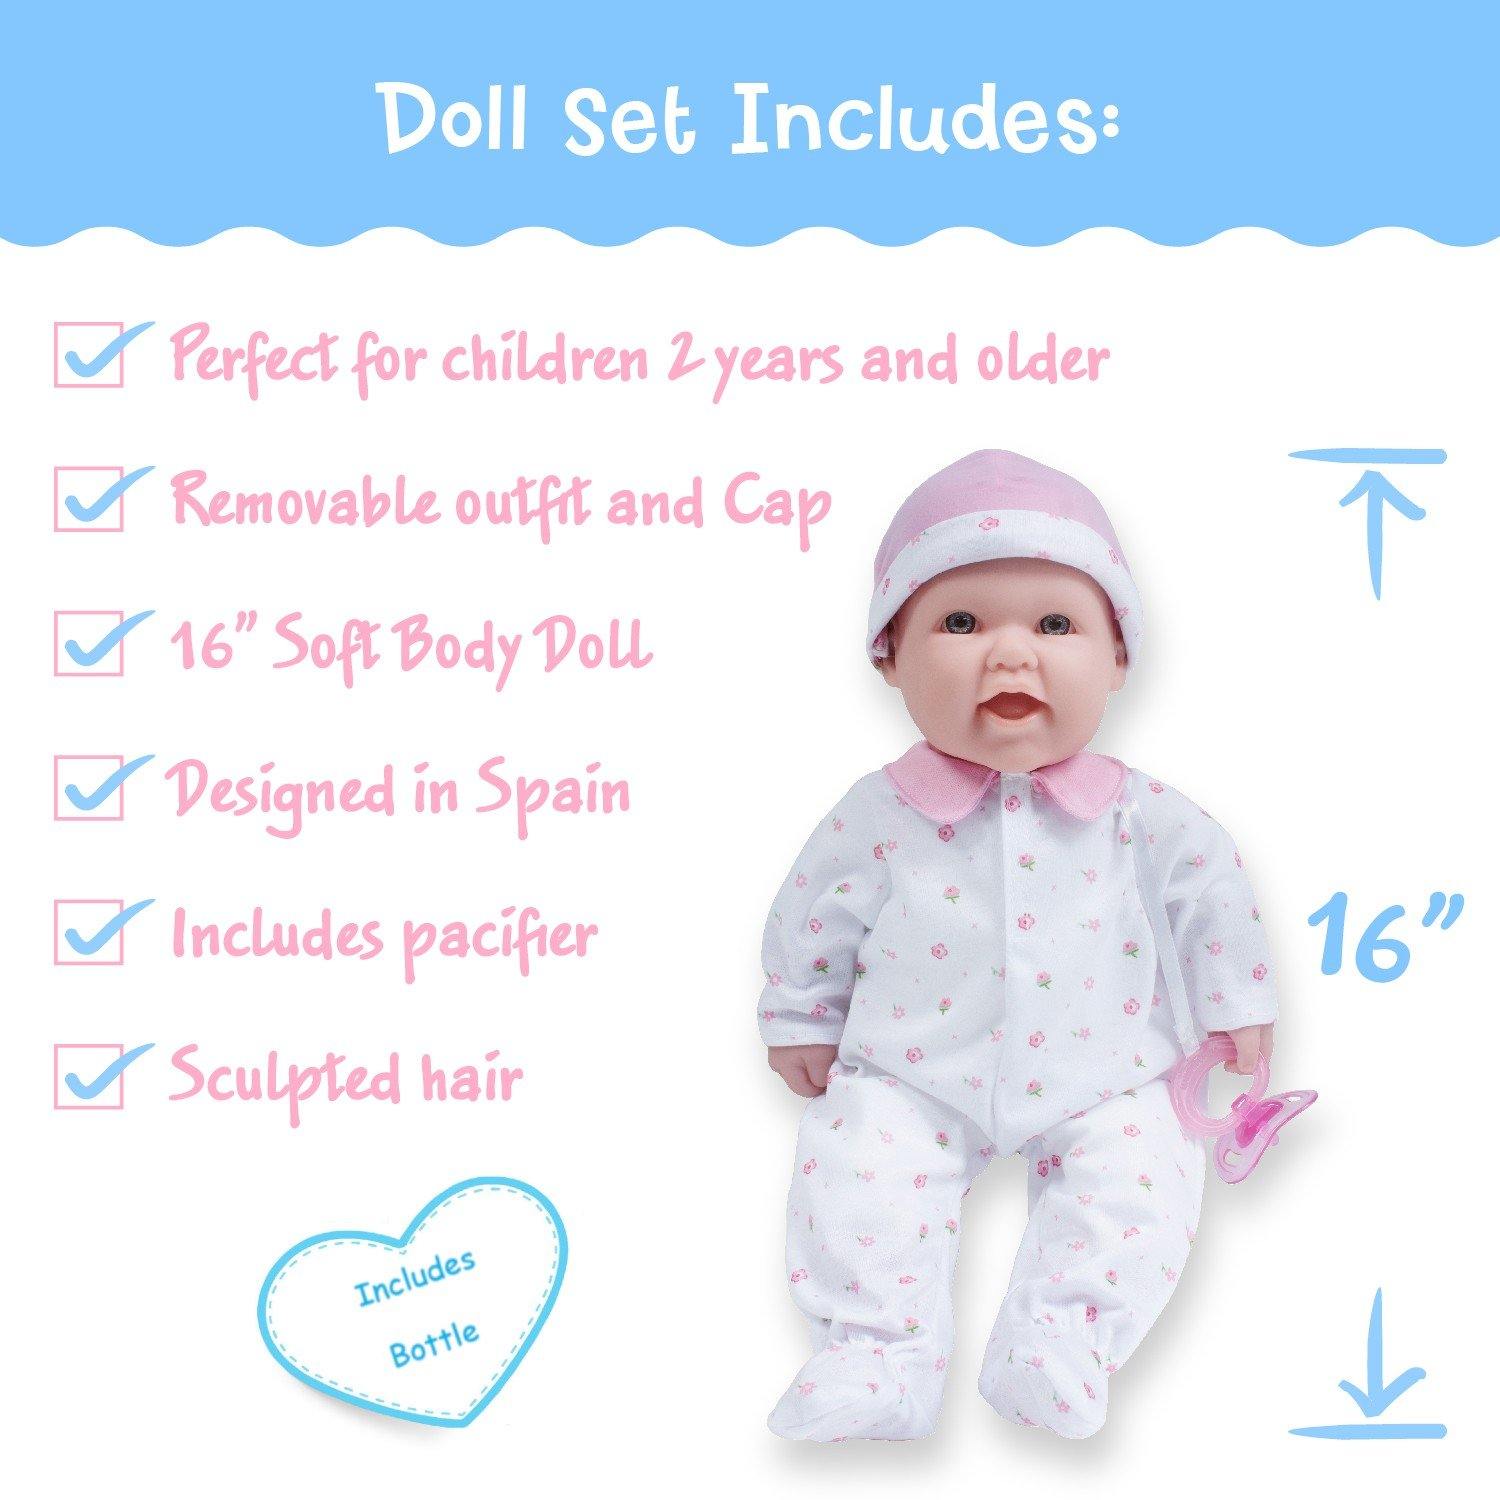 JC Toys, La Baby 16 inches Soft Body Baby Doll in Pink - Realistic Features - JC Toys Group Inc.